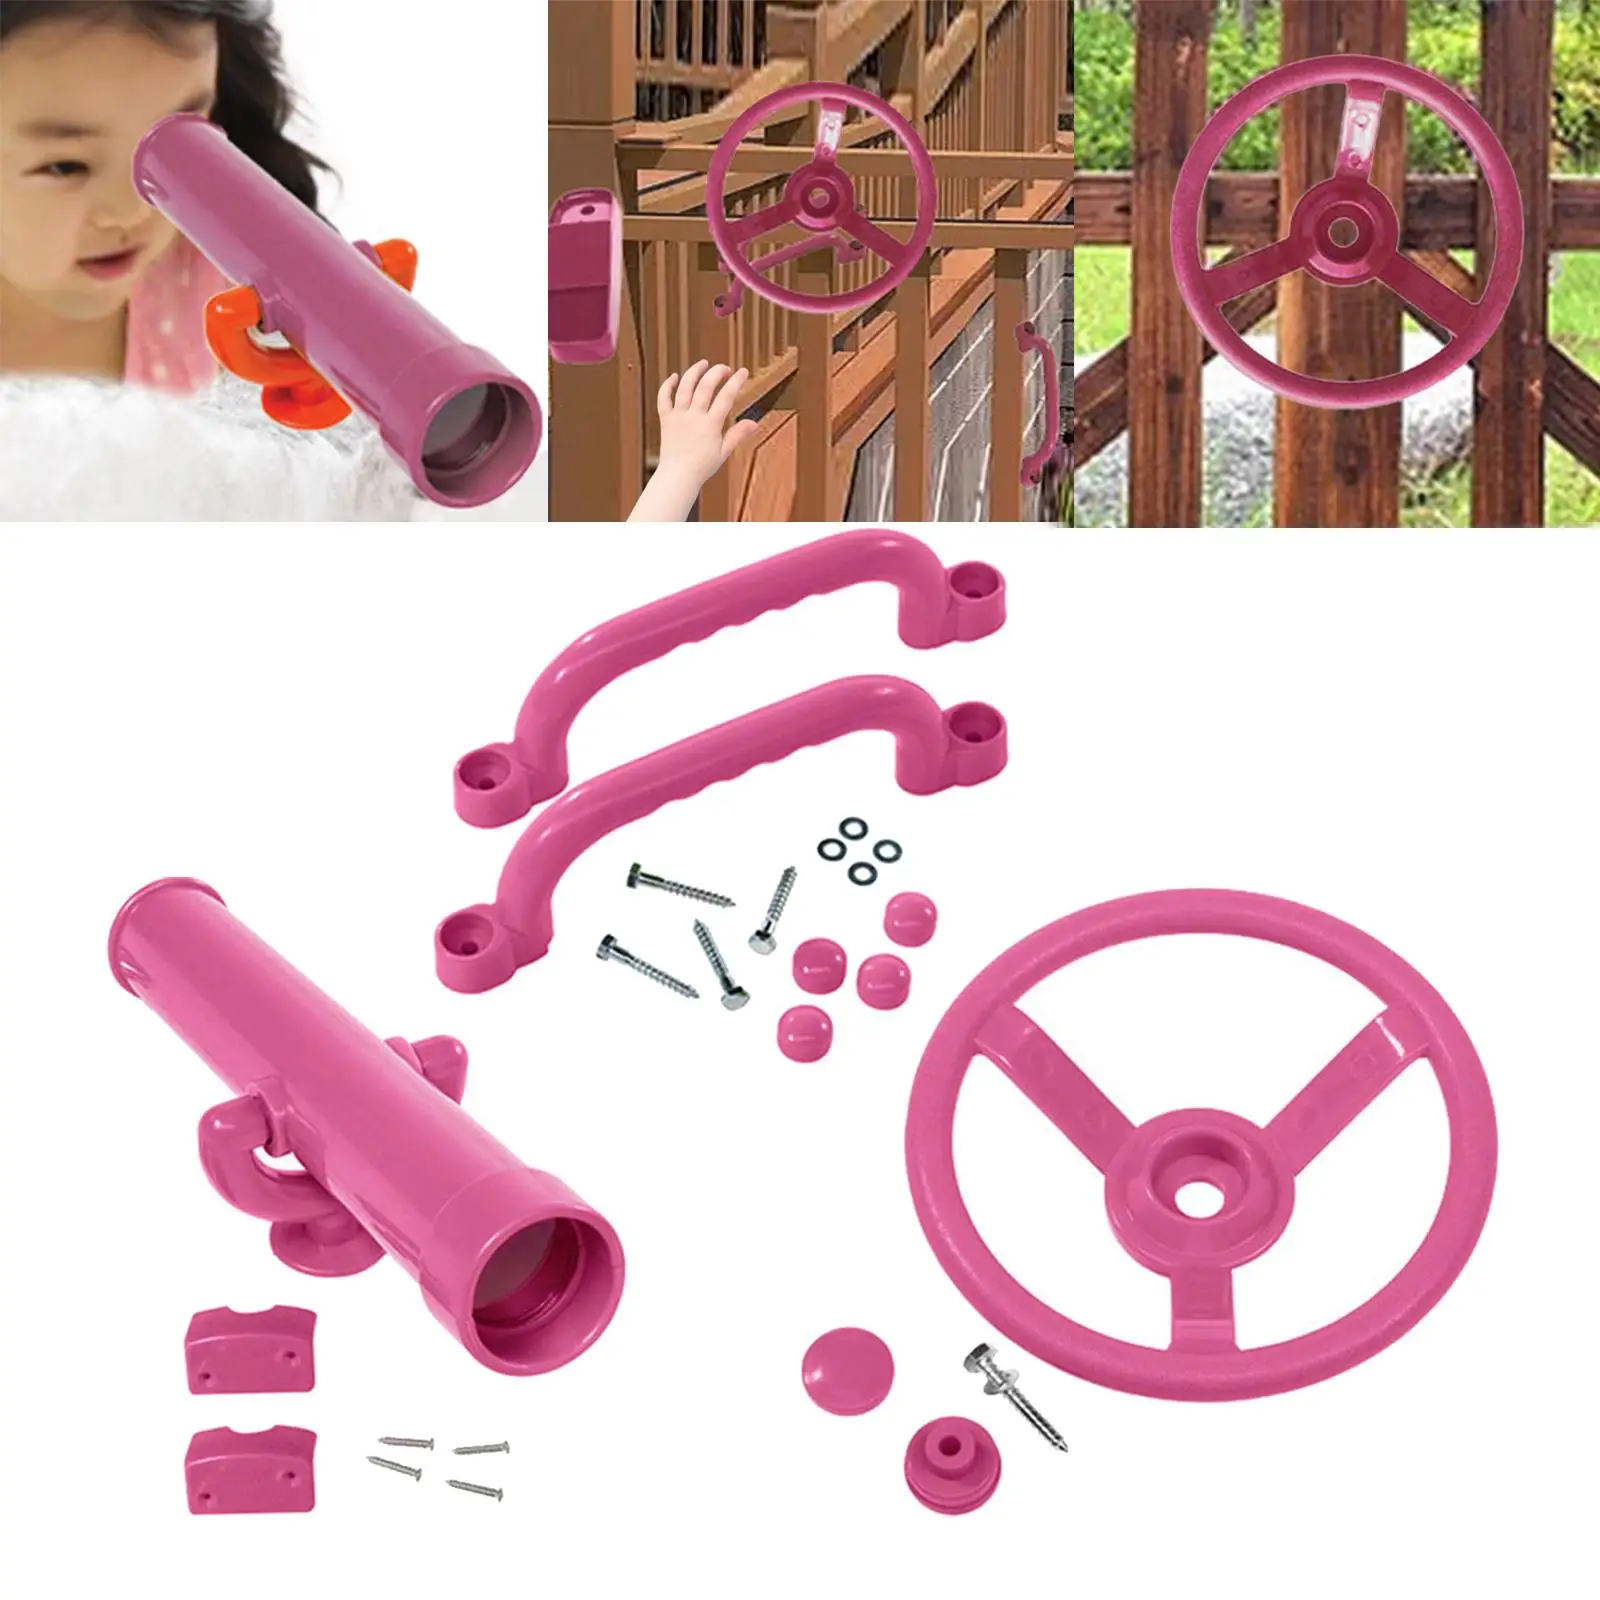 Playground Accessories Pink Set Pirate Ship Parts Valentines Day Gifts for Treehouse Jungle Gym Backyard Playhouse Attachments